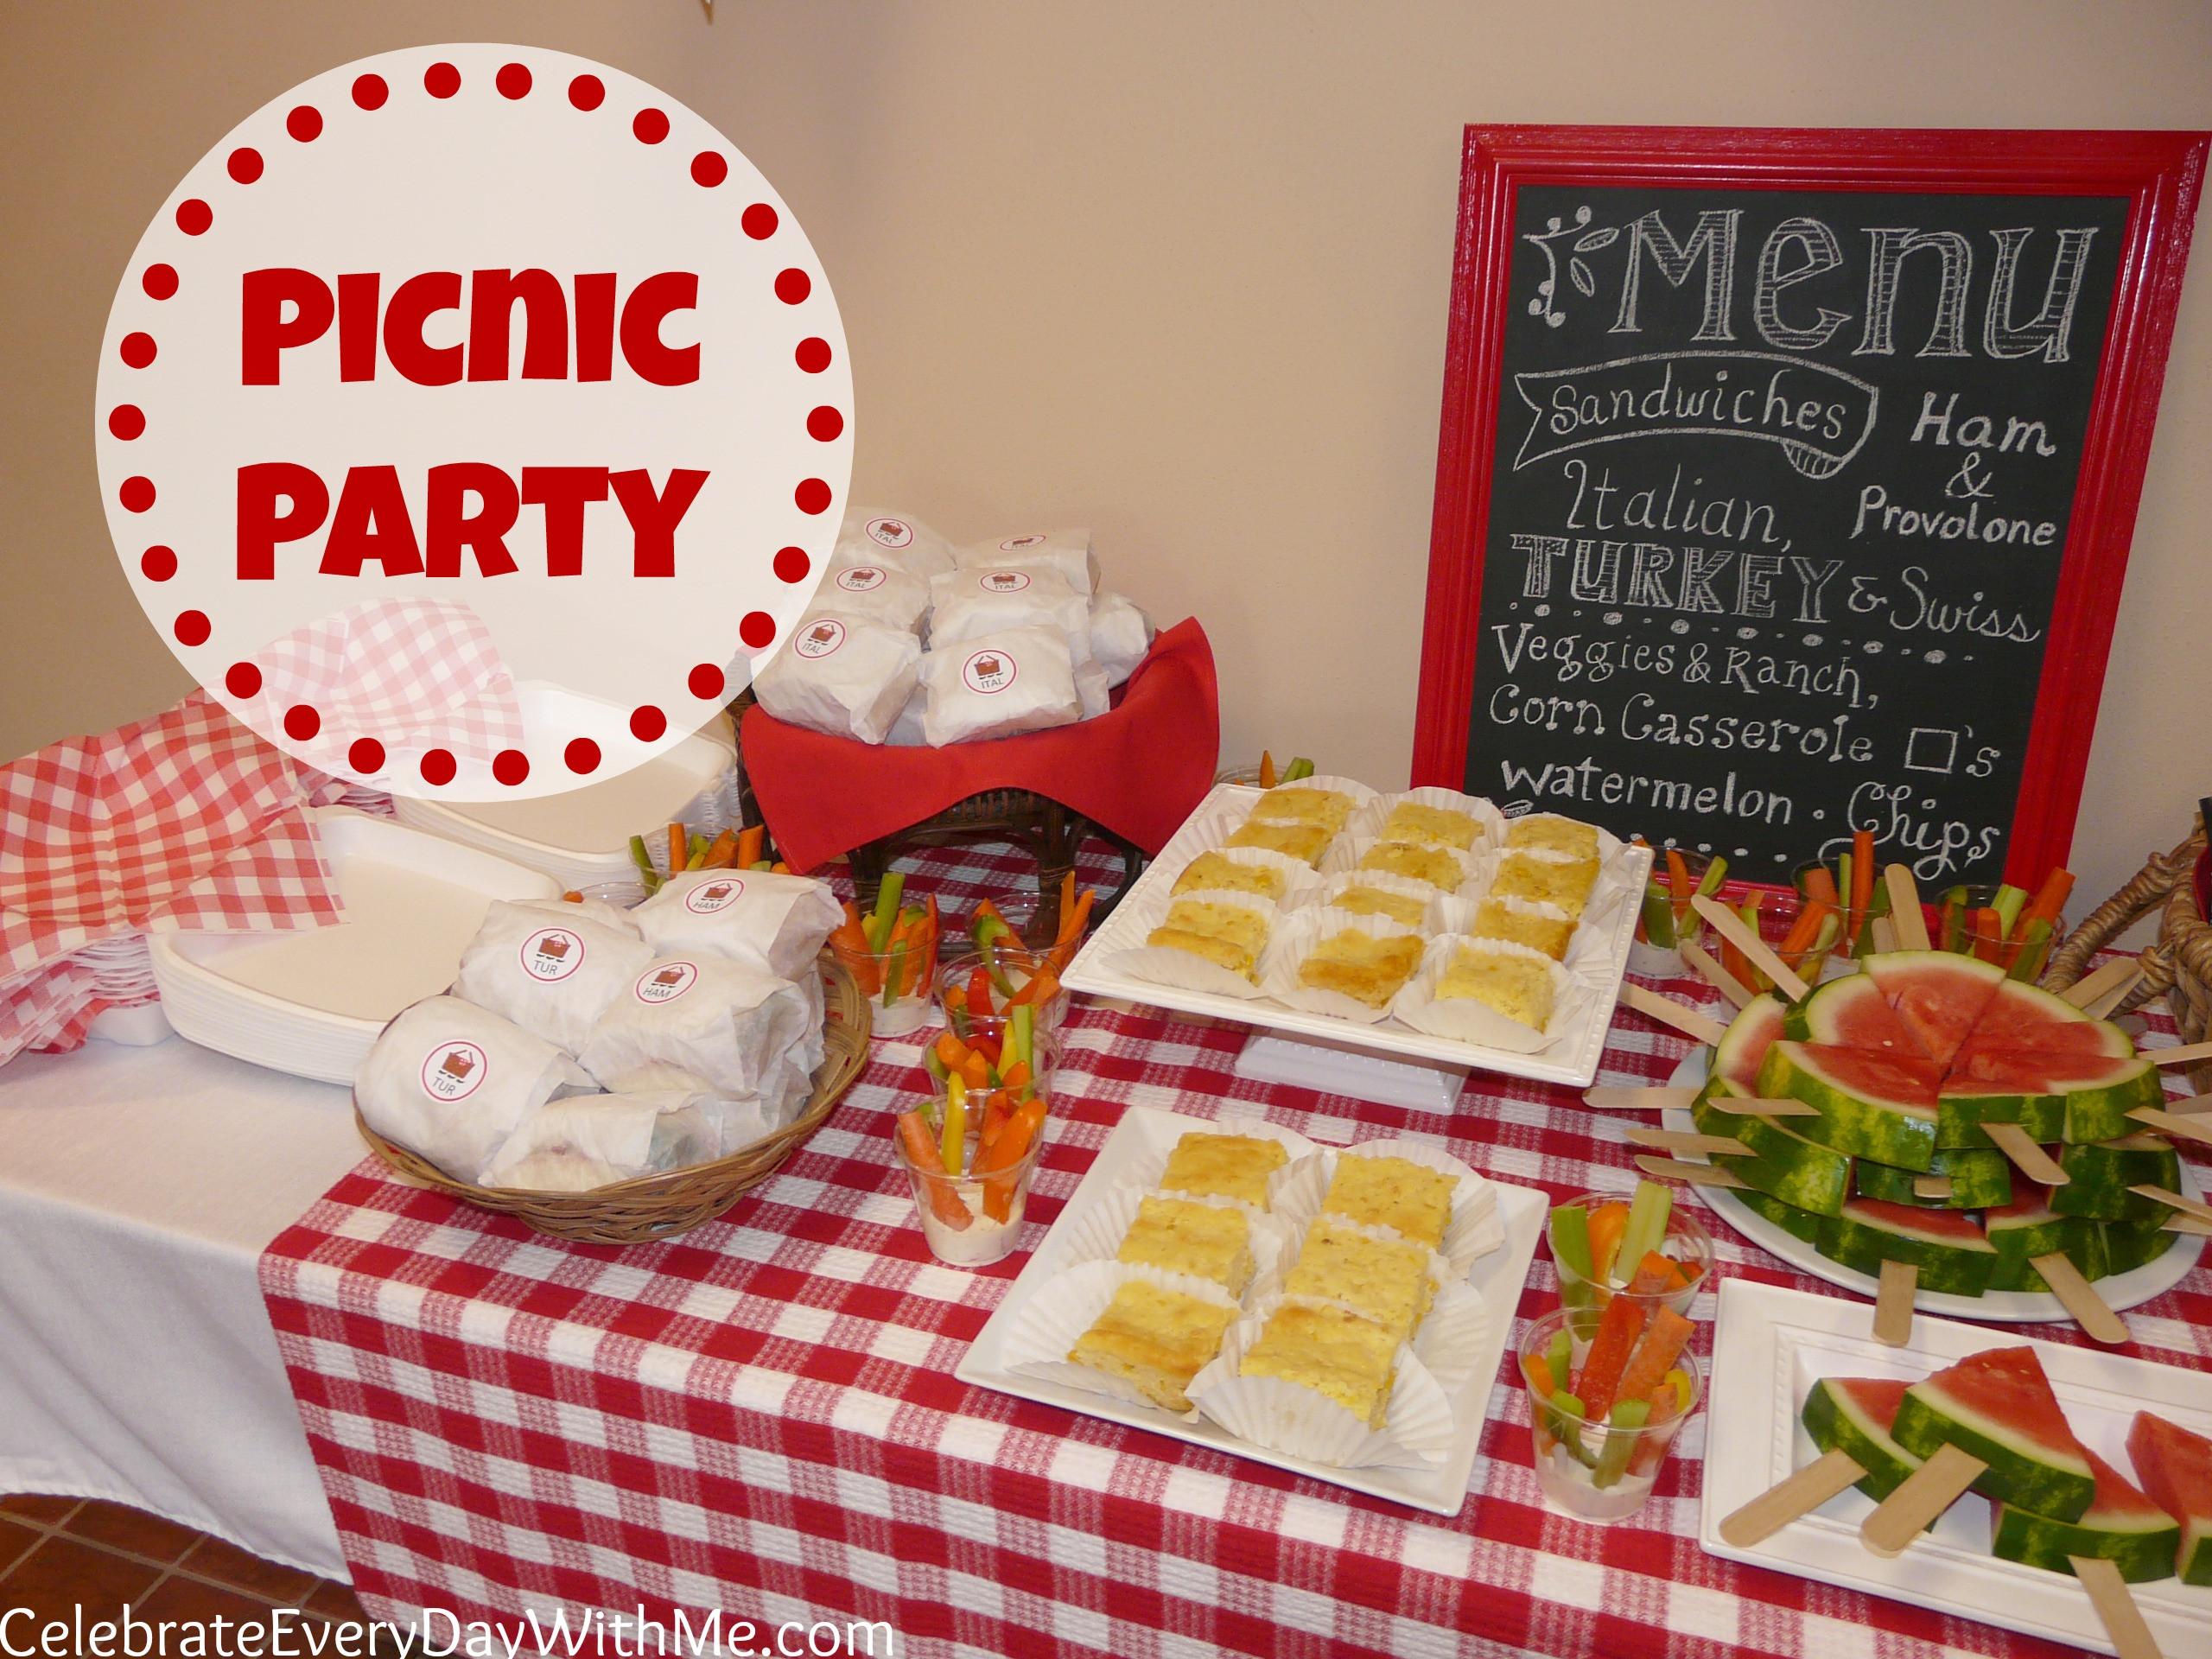 Picnic Birthday Party Food Ideas
 A Picnic Party Celebrate Every Day With Me